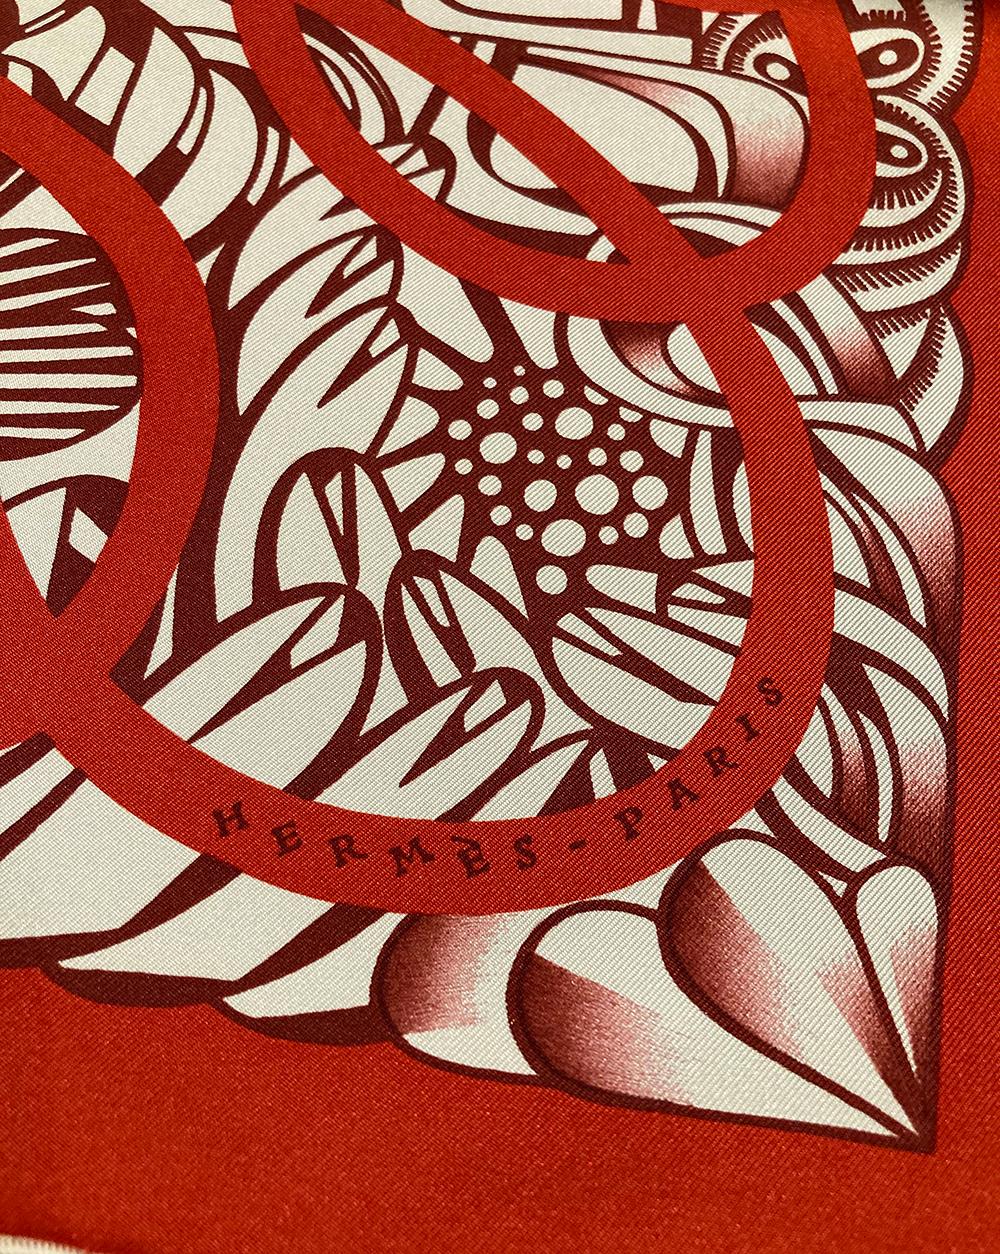 NWT Hermes Reverie Solitaire Silk Scarf in new unused condition. Silk screen design c2019 by Florence Manlik. Bright red main color with black and red illustrated floral print behind. 100% silk. white hand rolled hem. made in france. tag attached.